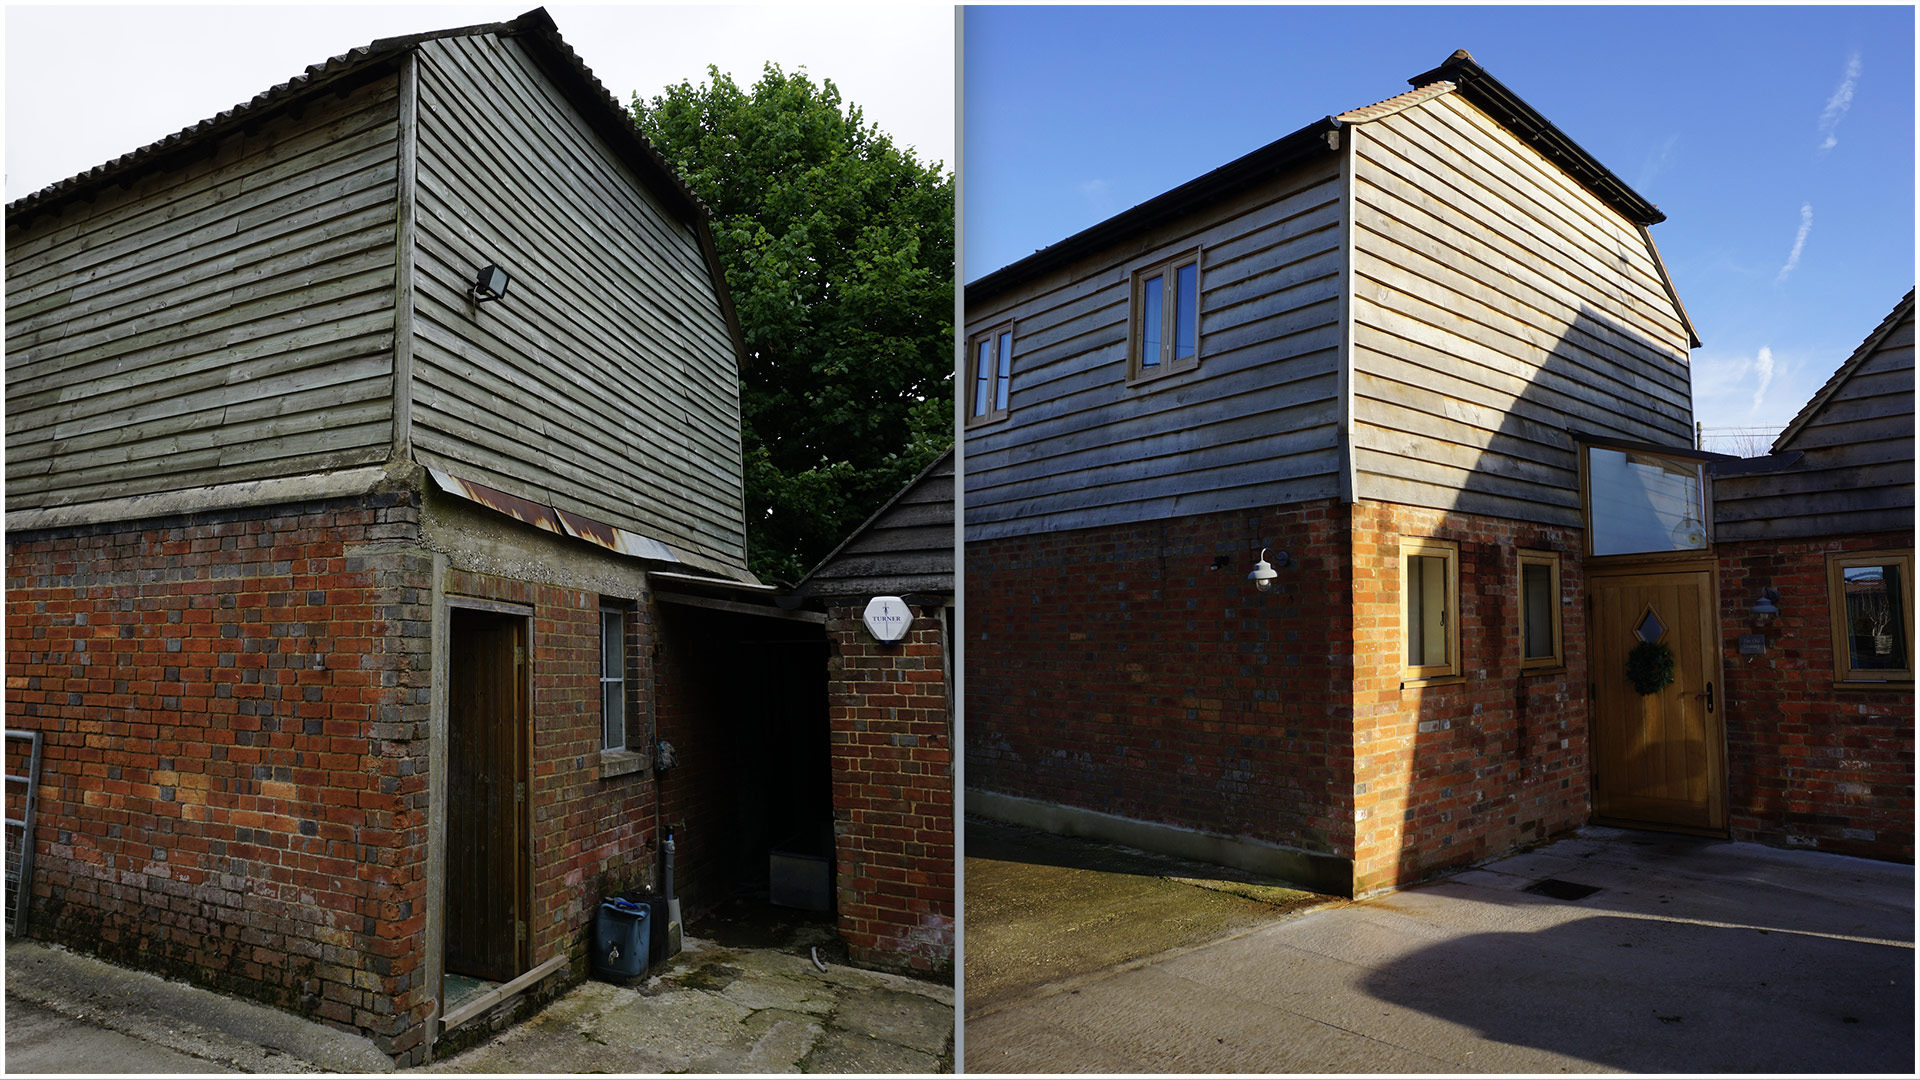 Barn Conversion Before and After